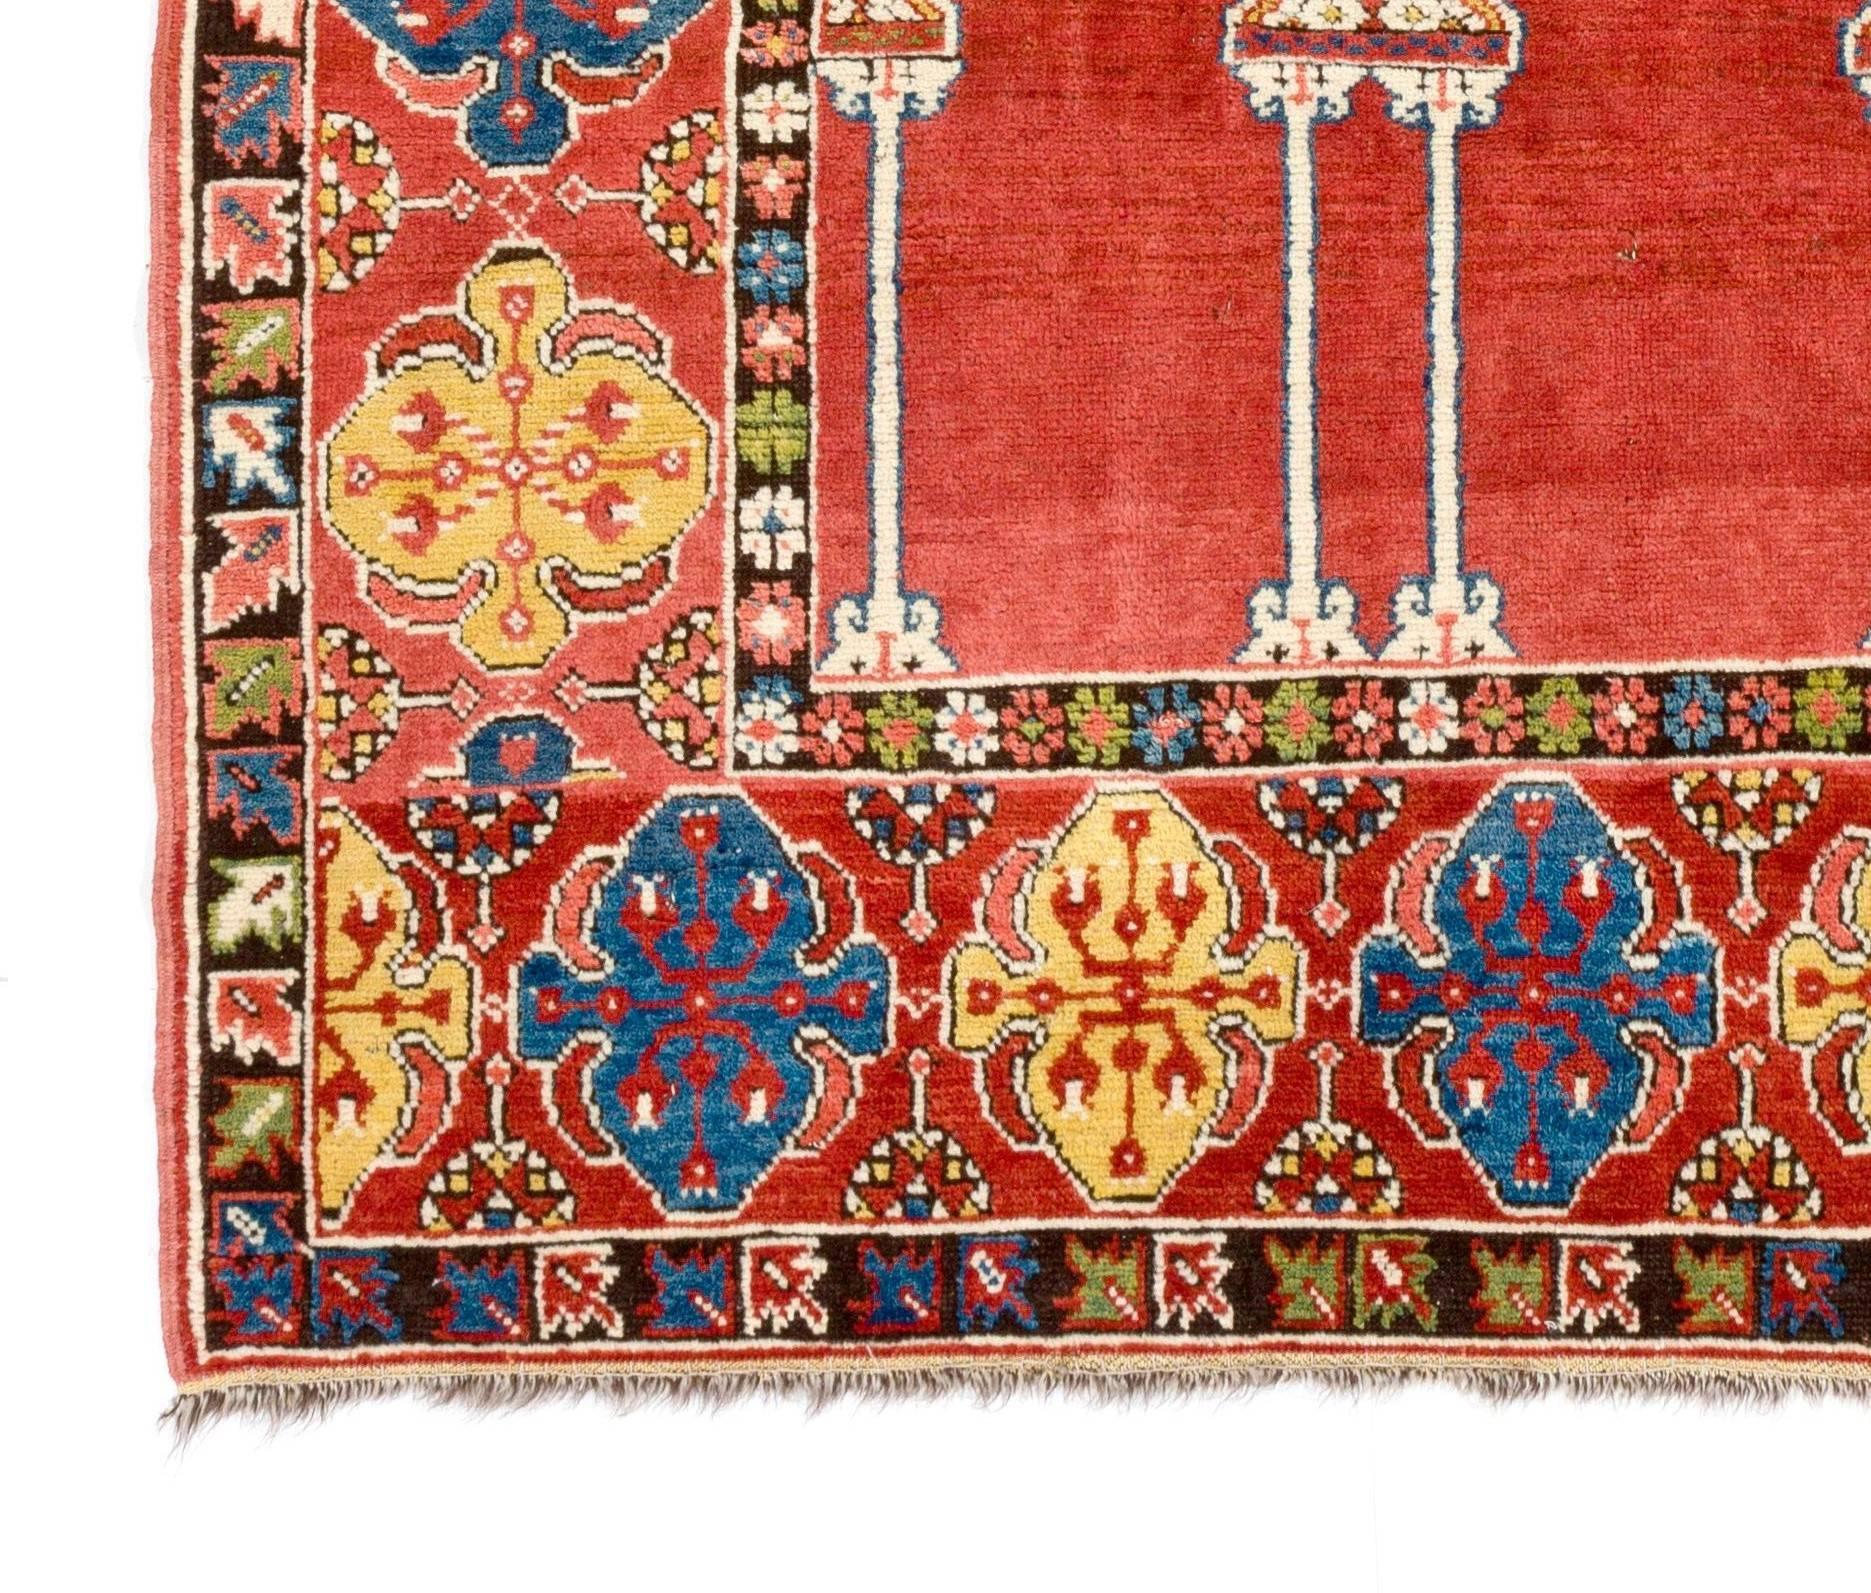 This is fantastic re-production of a 17th century Ottoman rug of the so called 